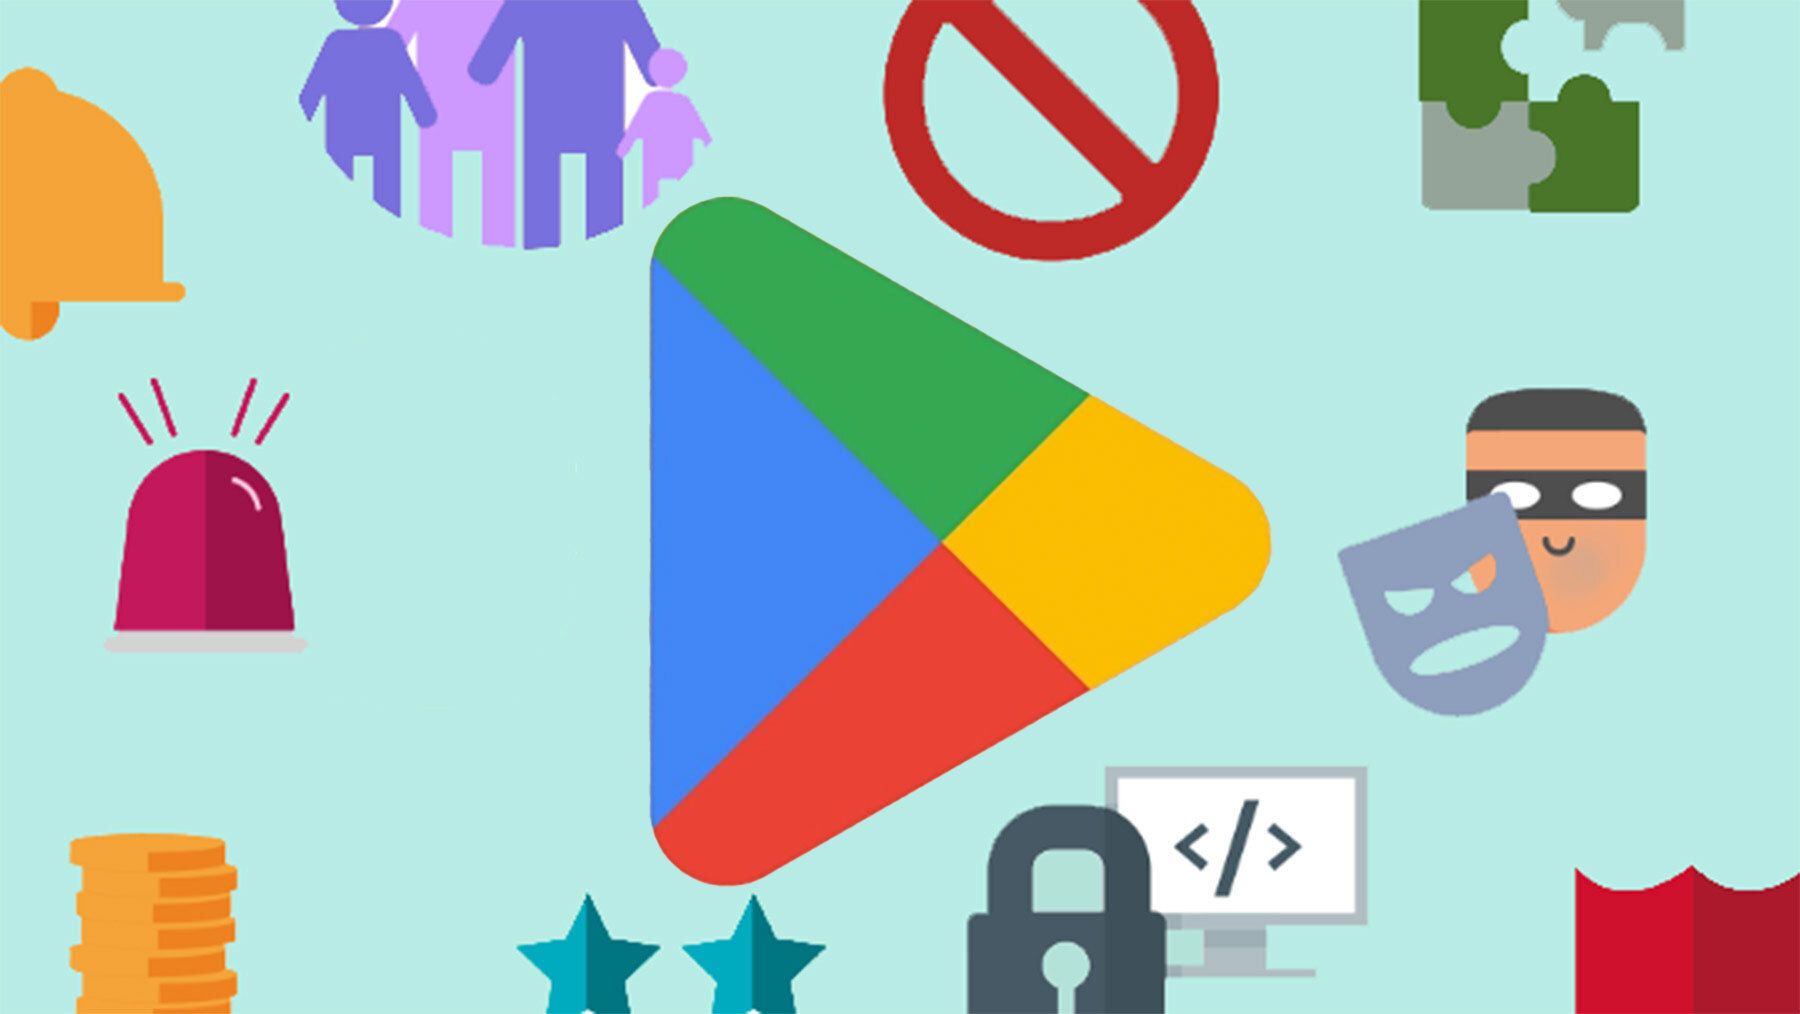 Google Play app changelogs have disappeared with no hint on the internet